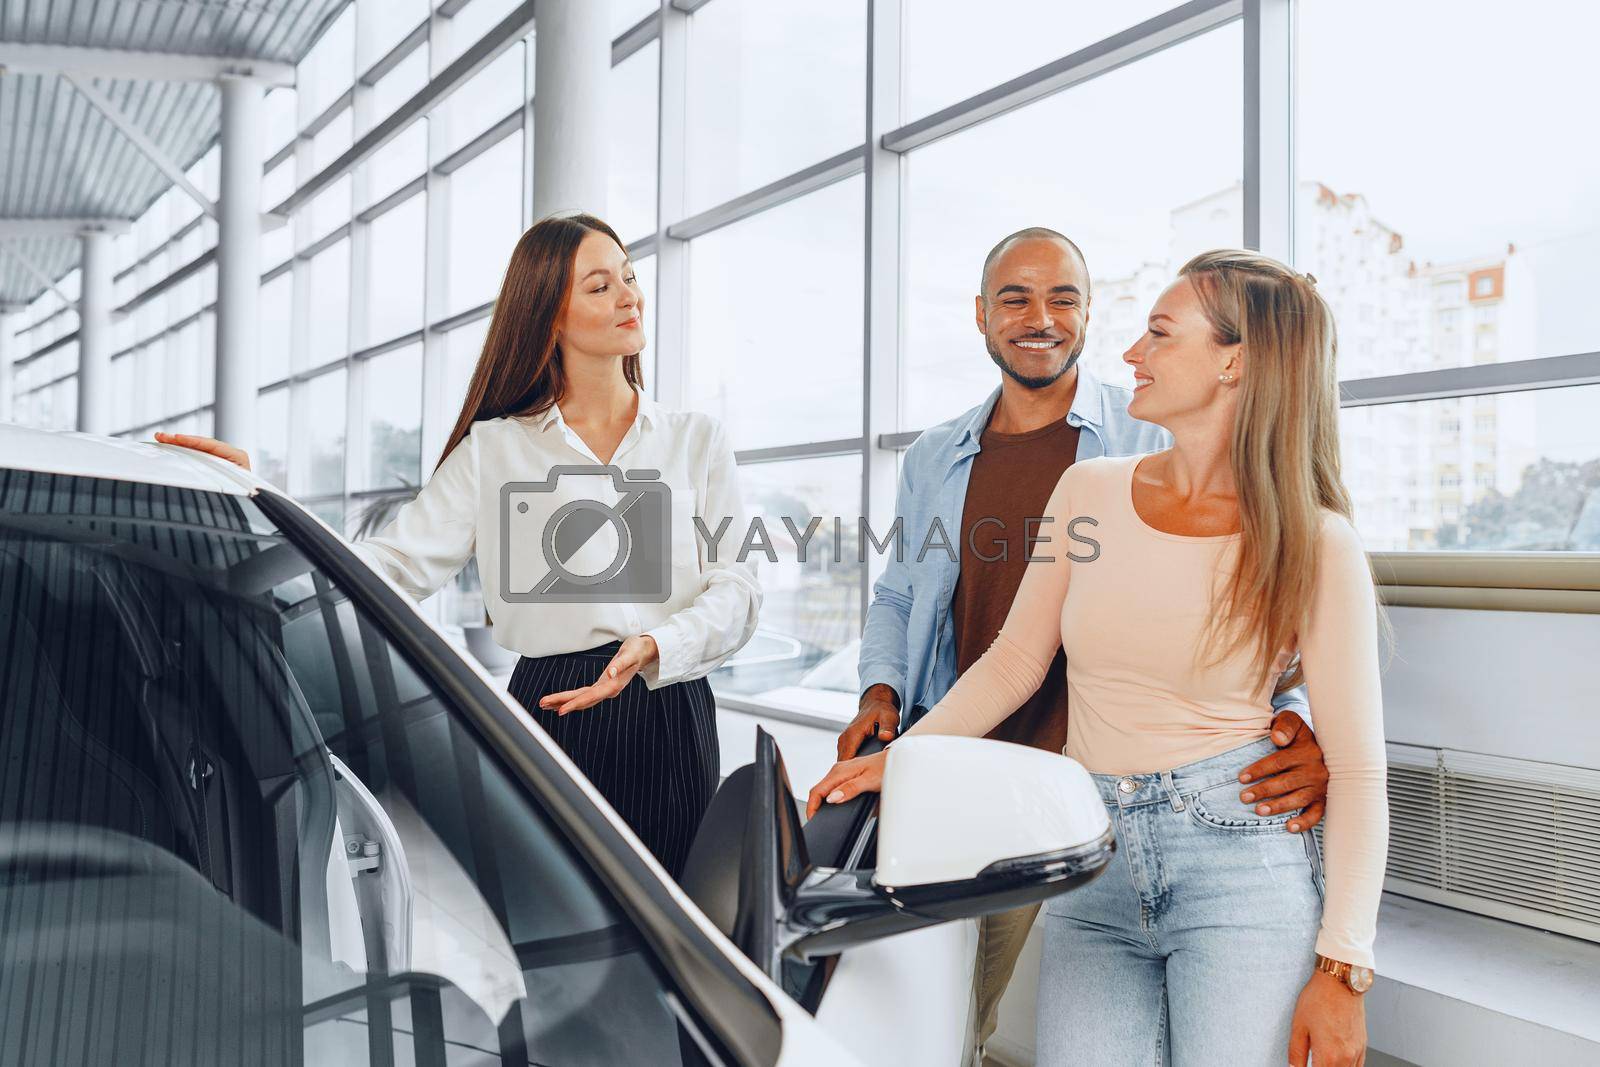 Royalty free image of Woman car dealer explaining to buyers features of their new car by Fabrikasimf